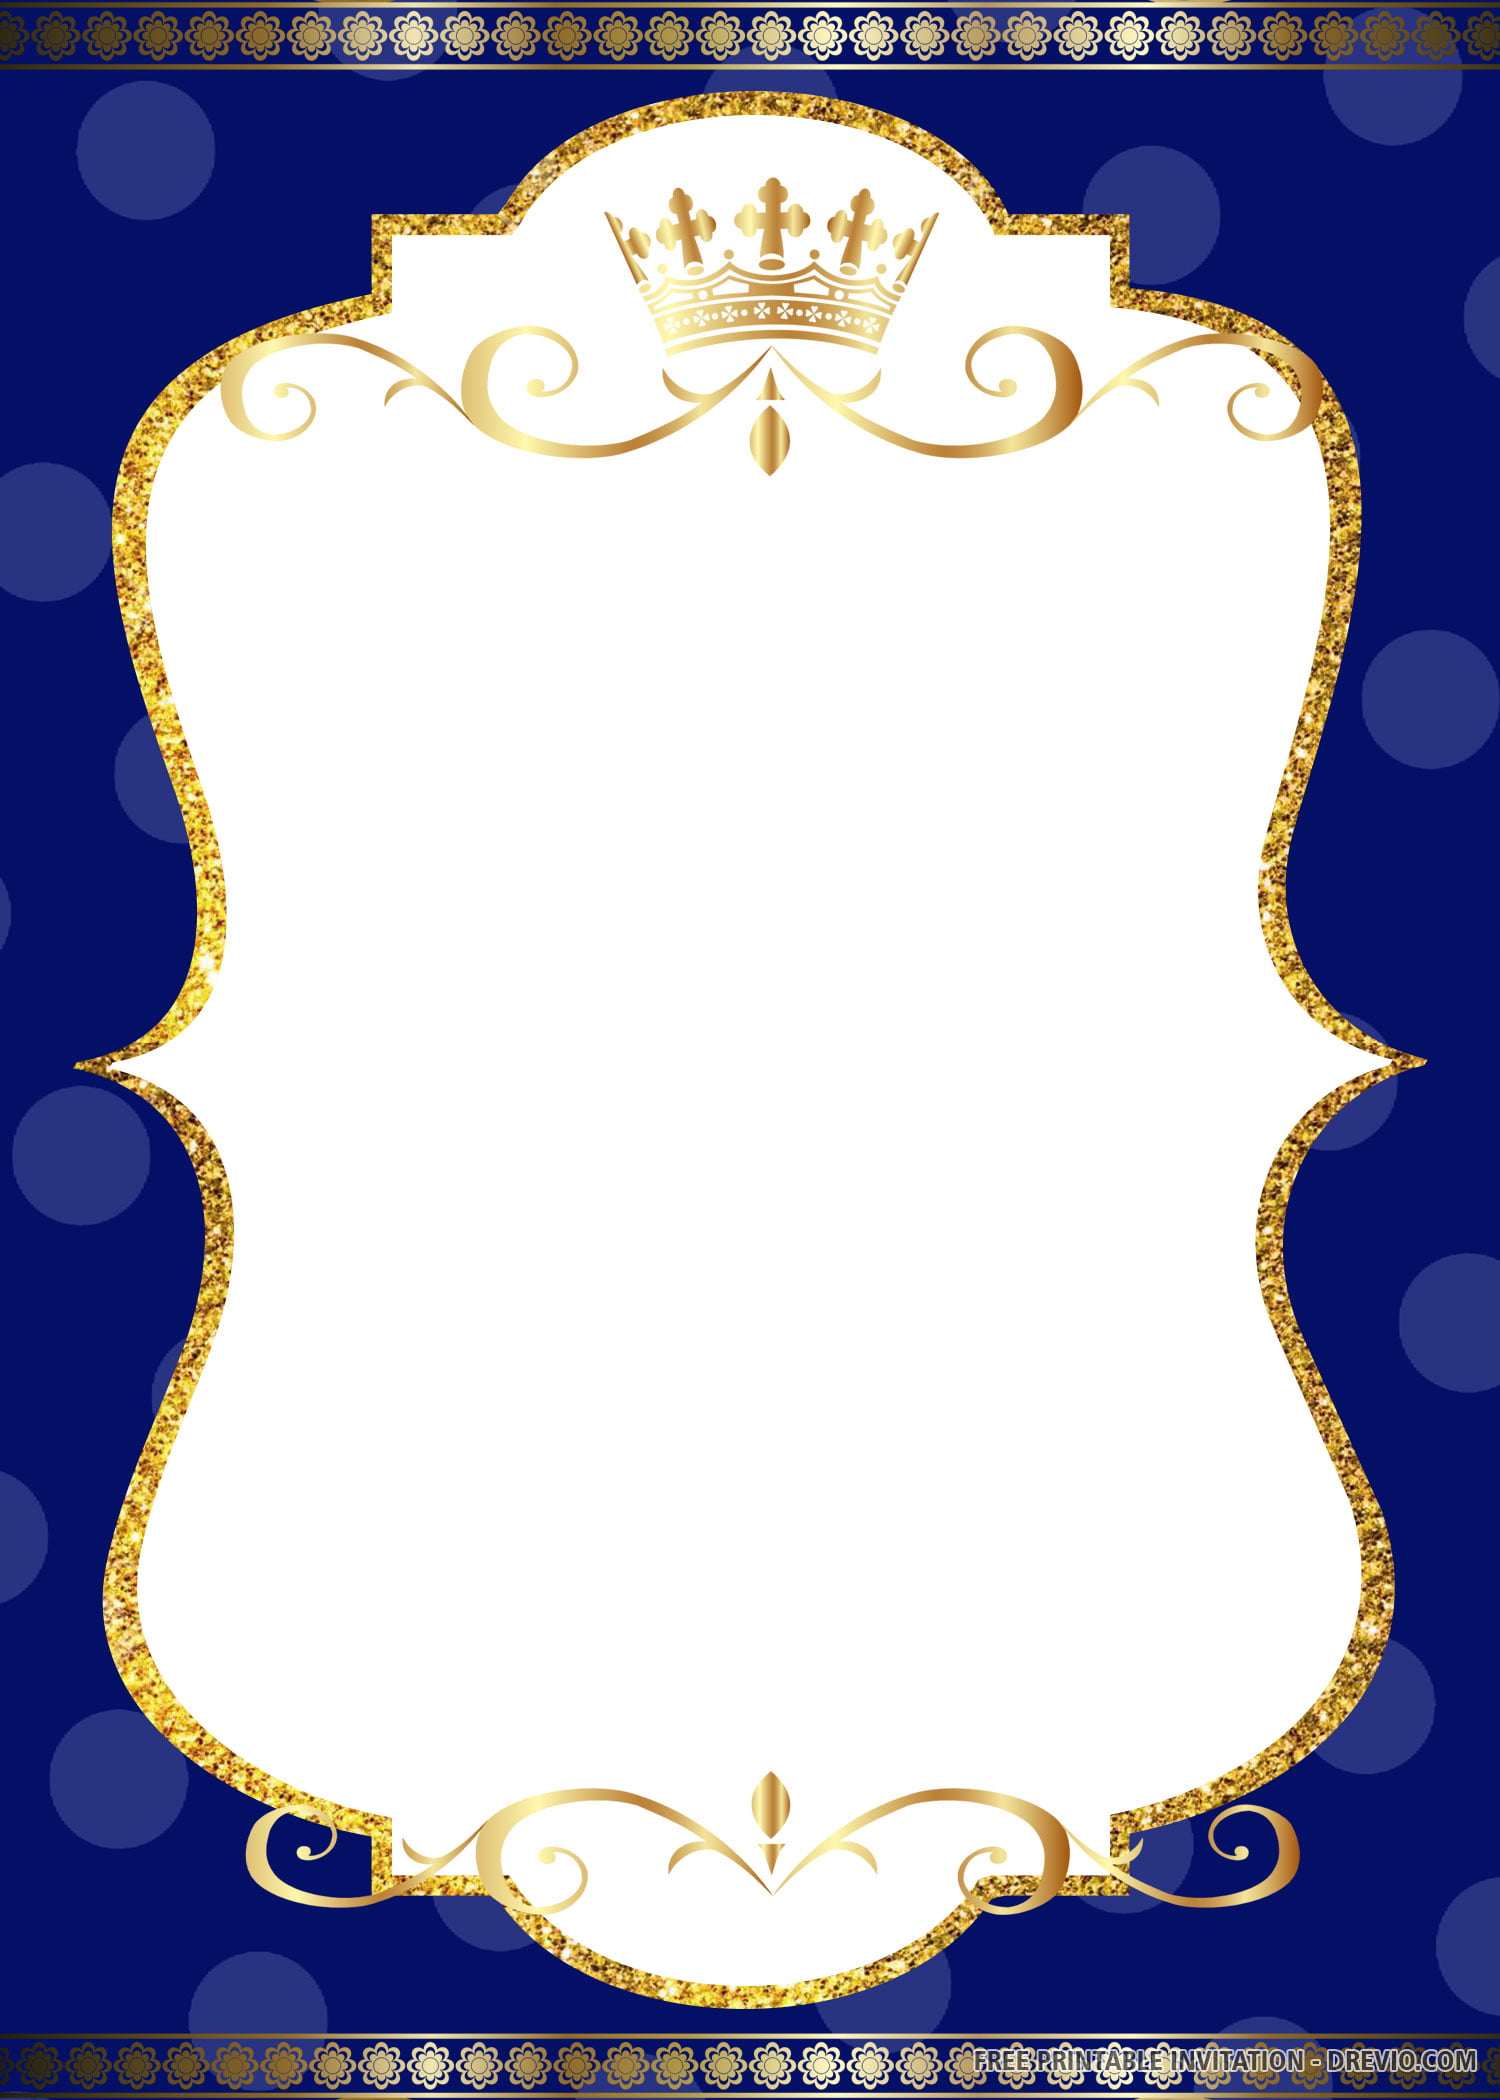 Royal Invitation Card Background Gold / Ornamental blue with gold